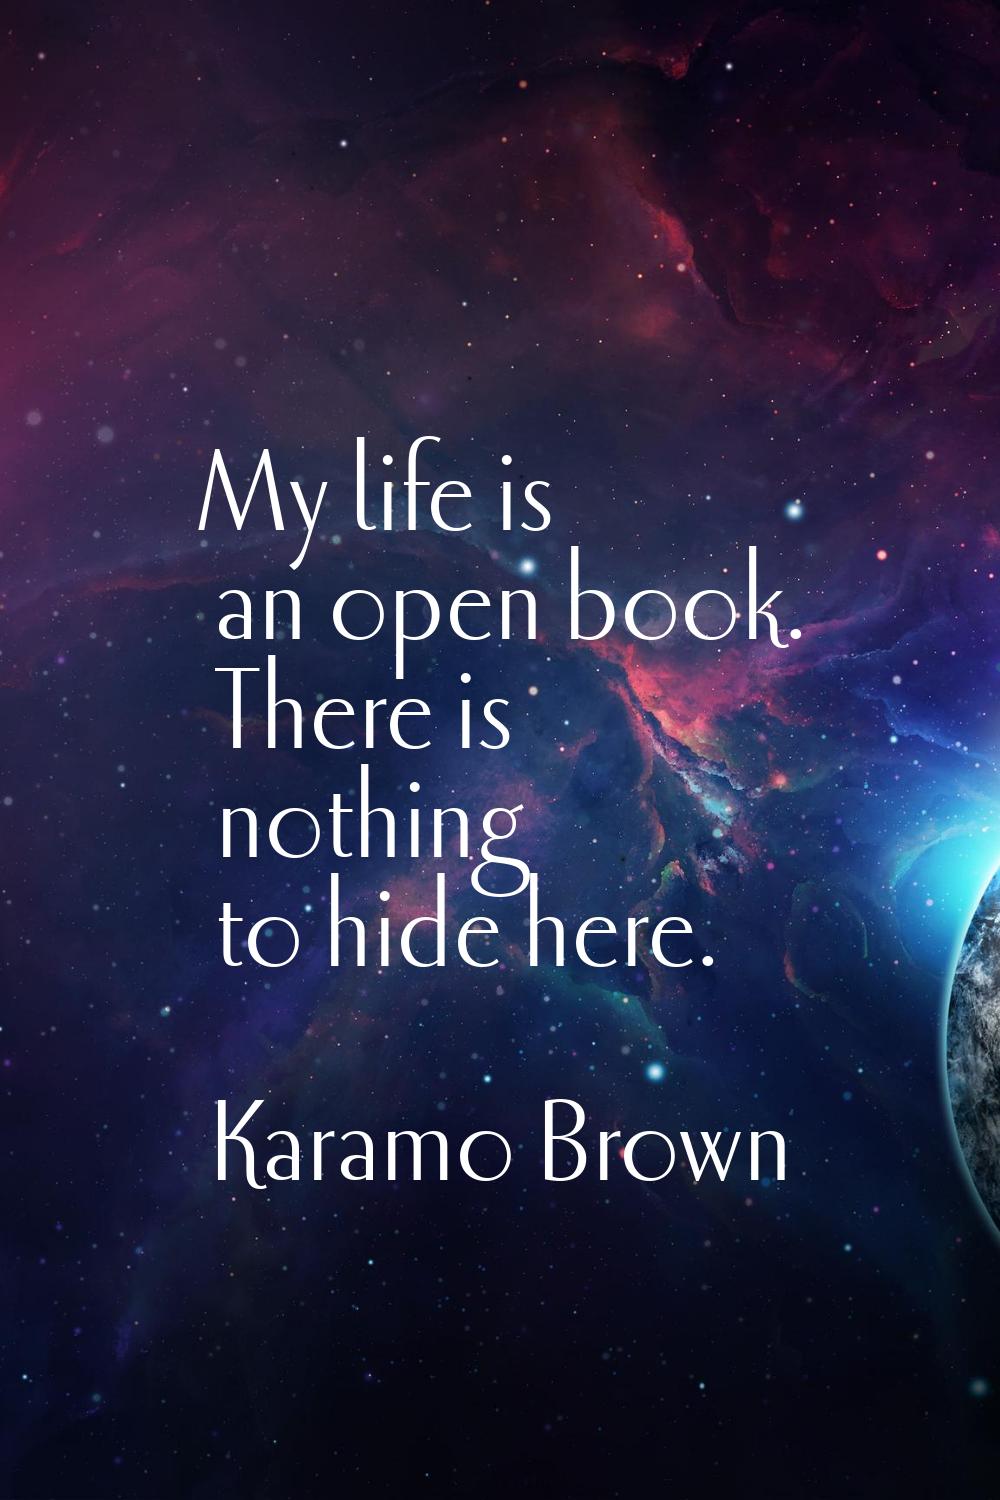 My life is an open book. There is nothing to hide here.